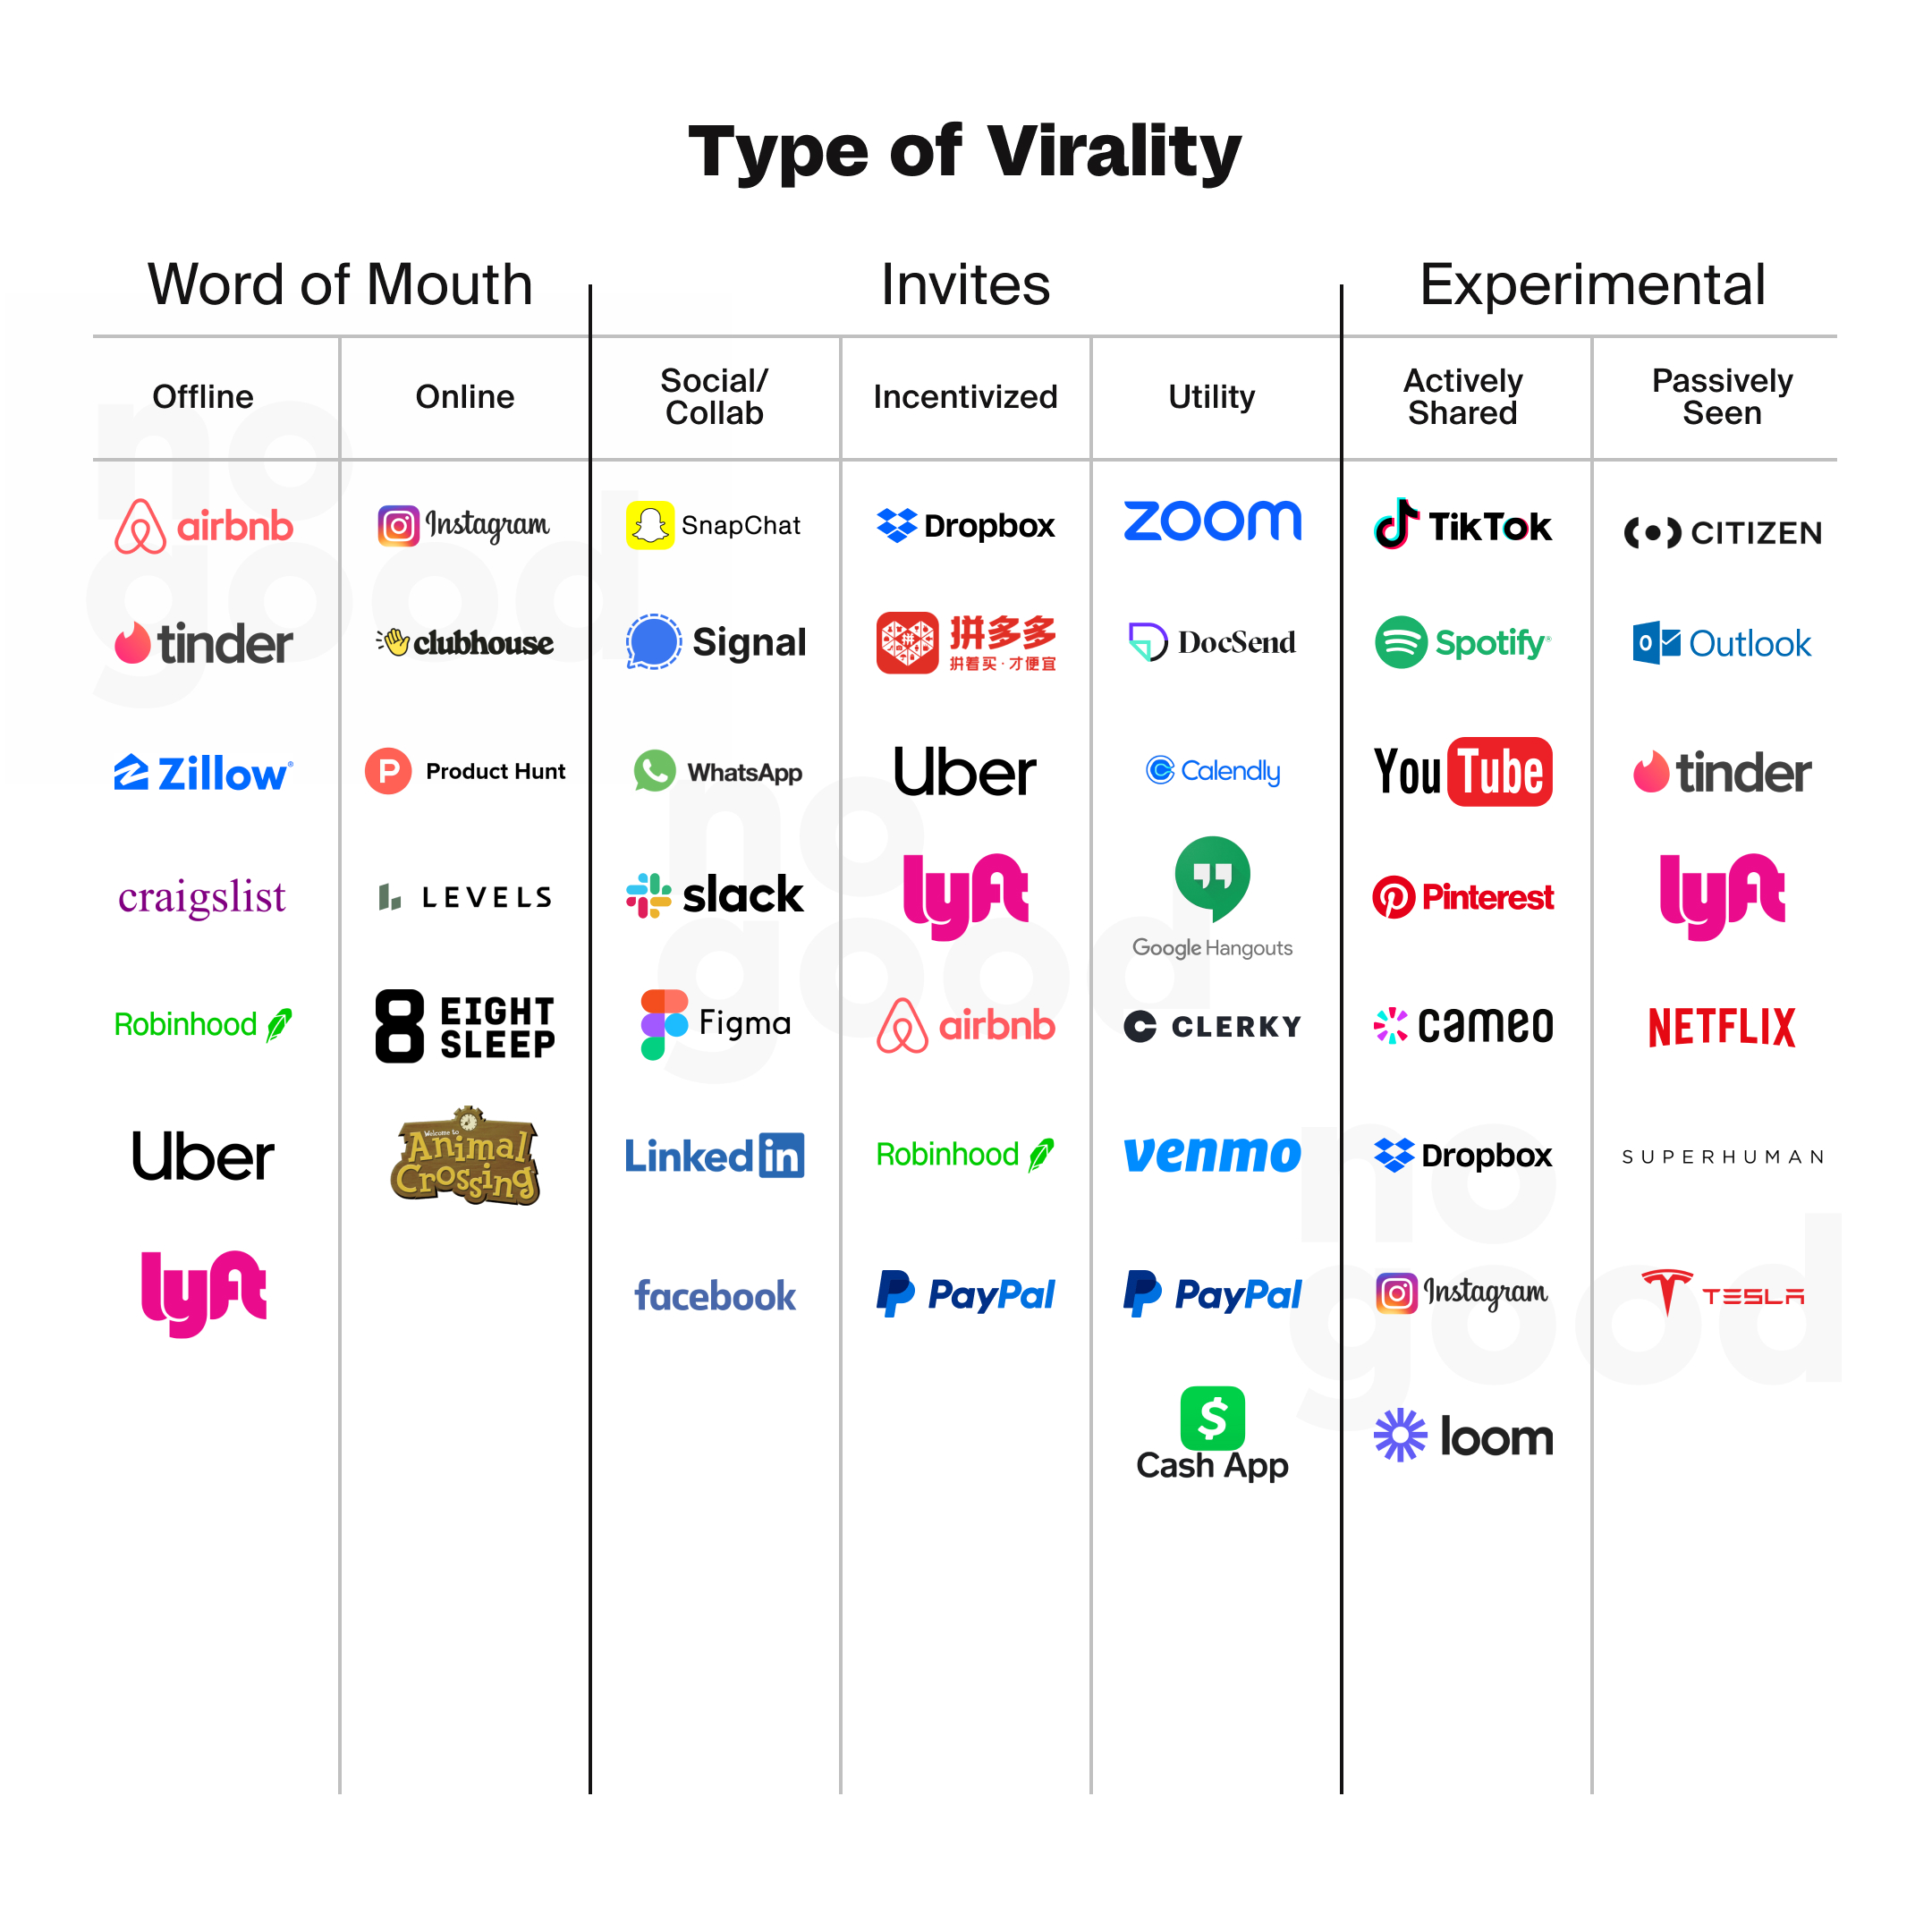 The different types of virality are word of mouth, invites, and experimental.